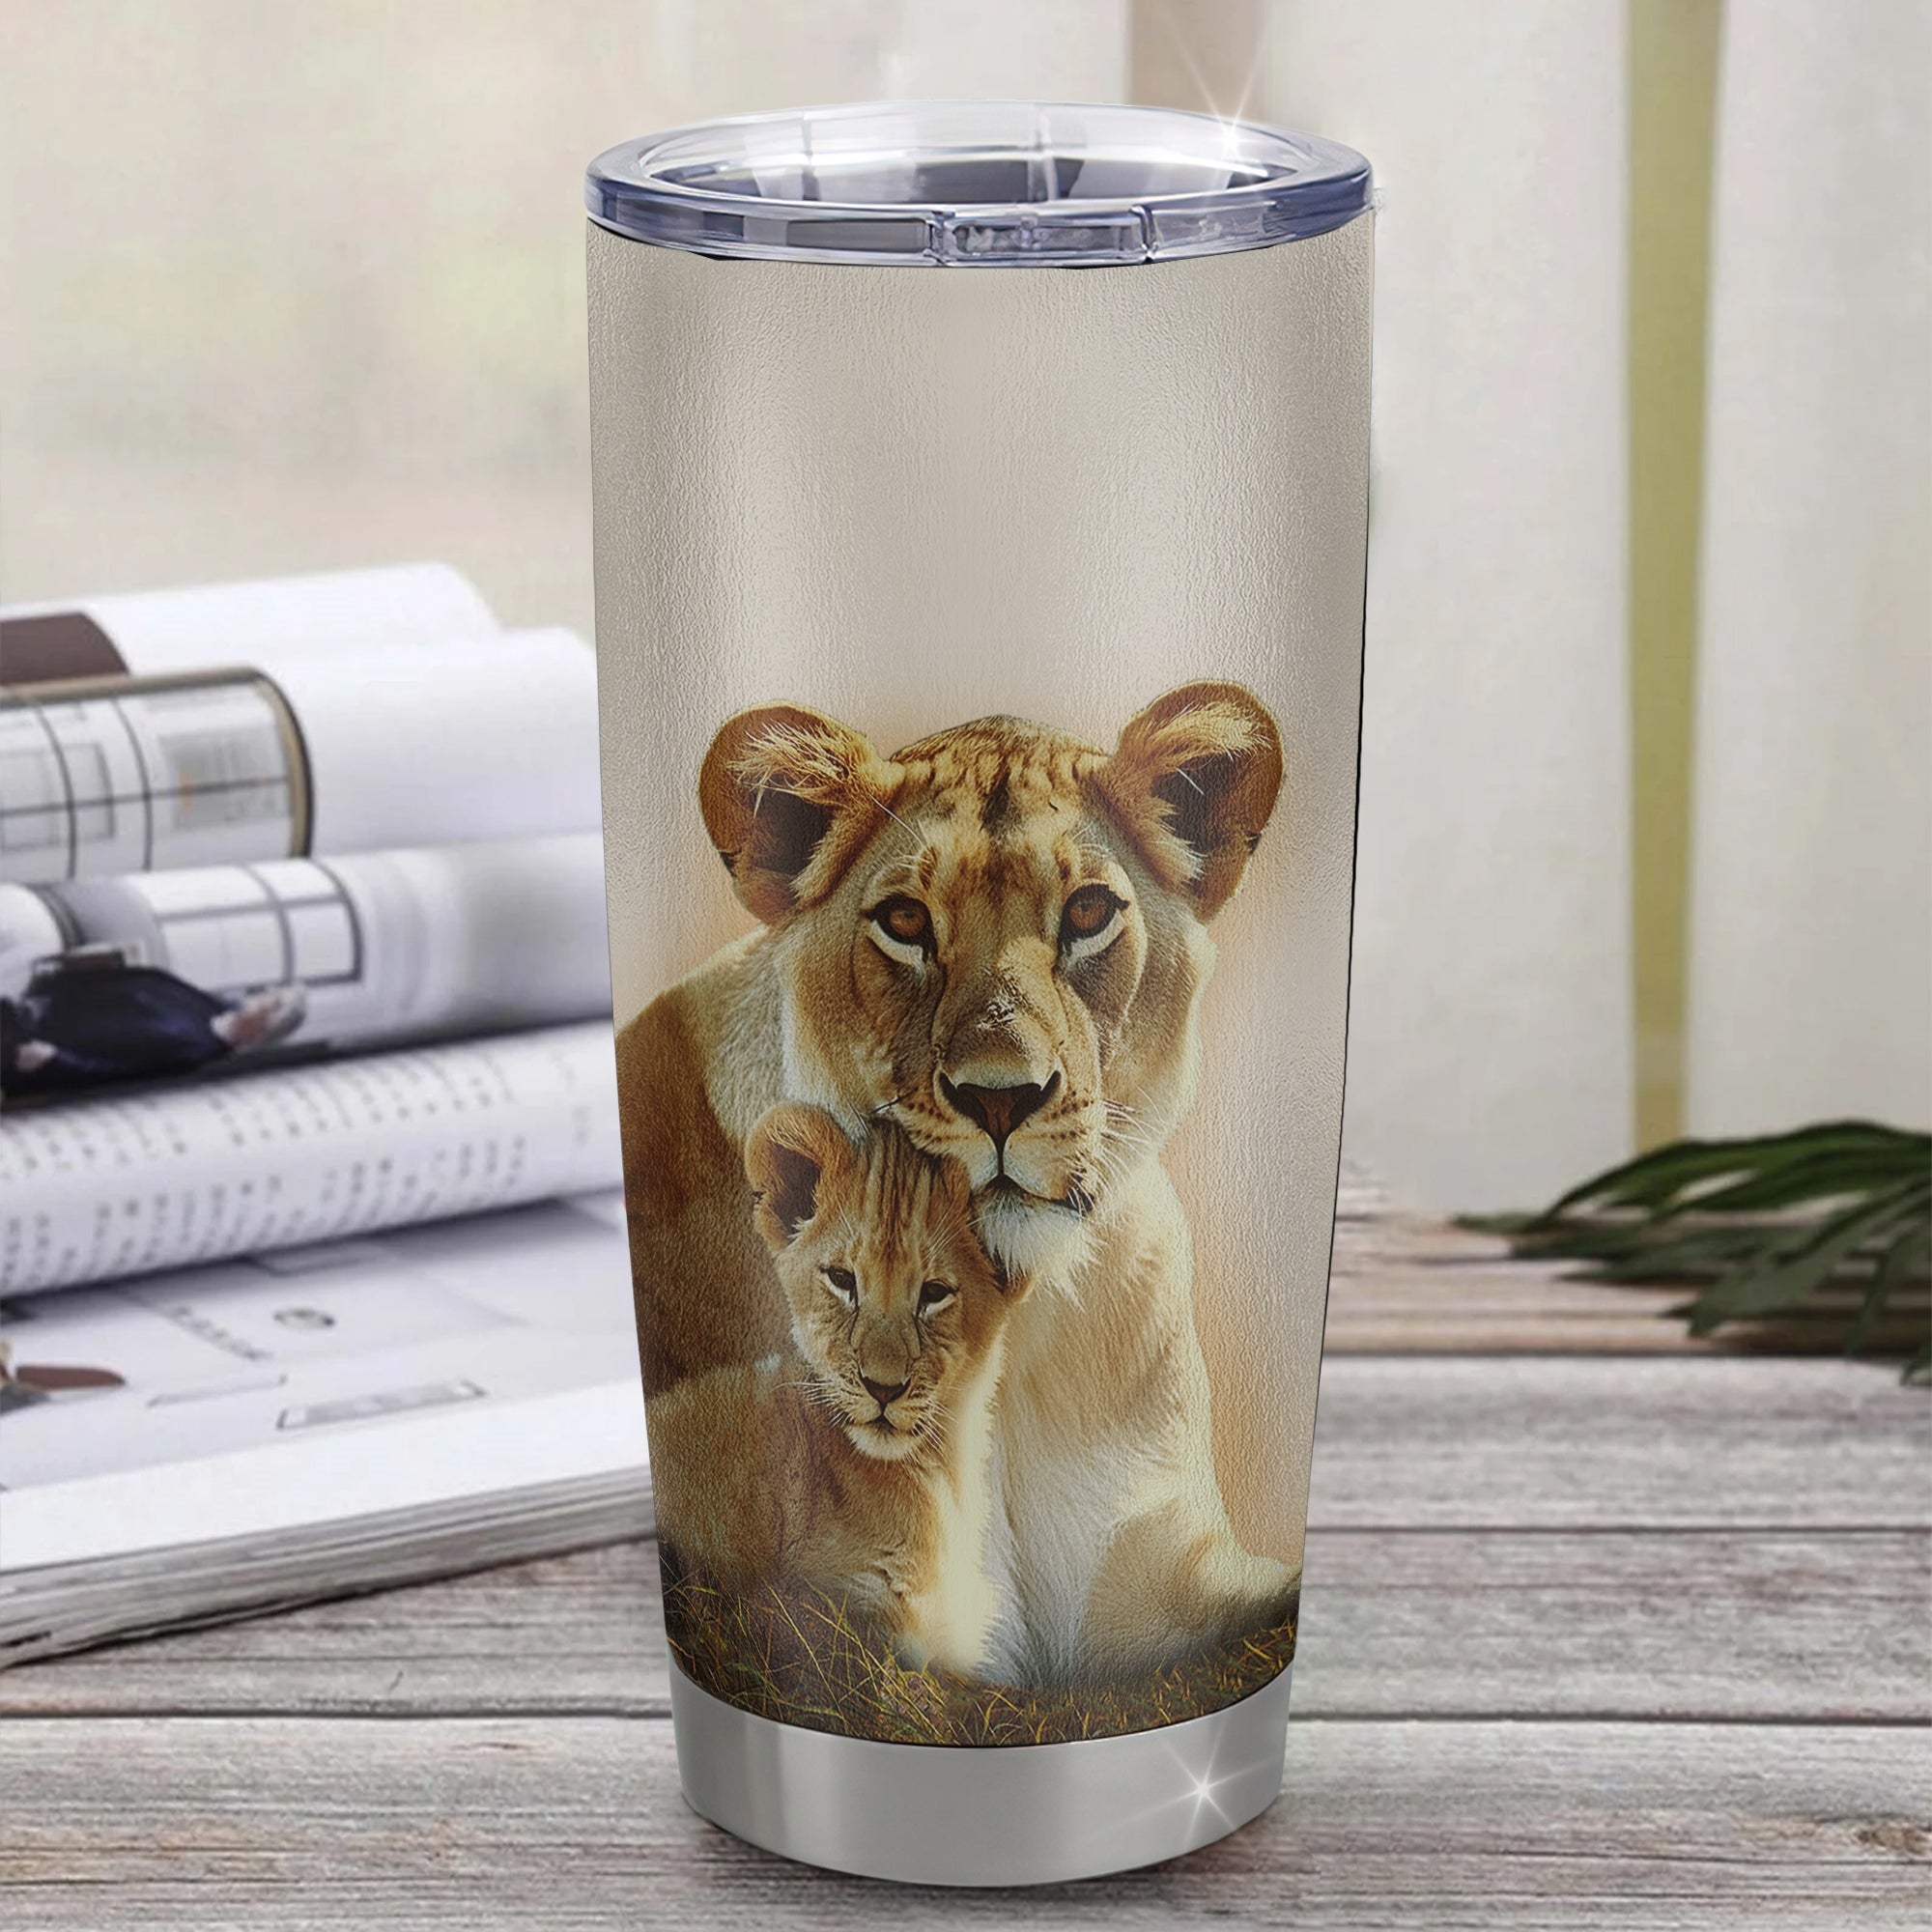 Personalized_To_My_Goddaughter_Tumbler_From_Aunt_Stainless_Steel_Cup_Lion_Never_Feel_That_You_Are_Alone_Great_Goddaughter_Birthday_Christmas_Travel_Mug_Tumbler_mockup_1.jpg